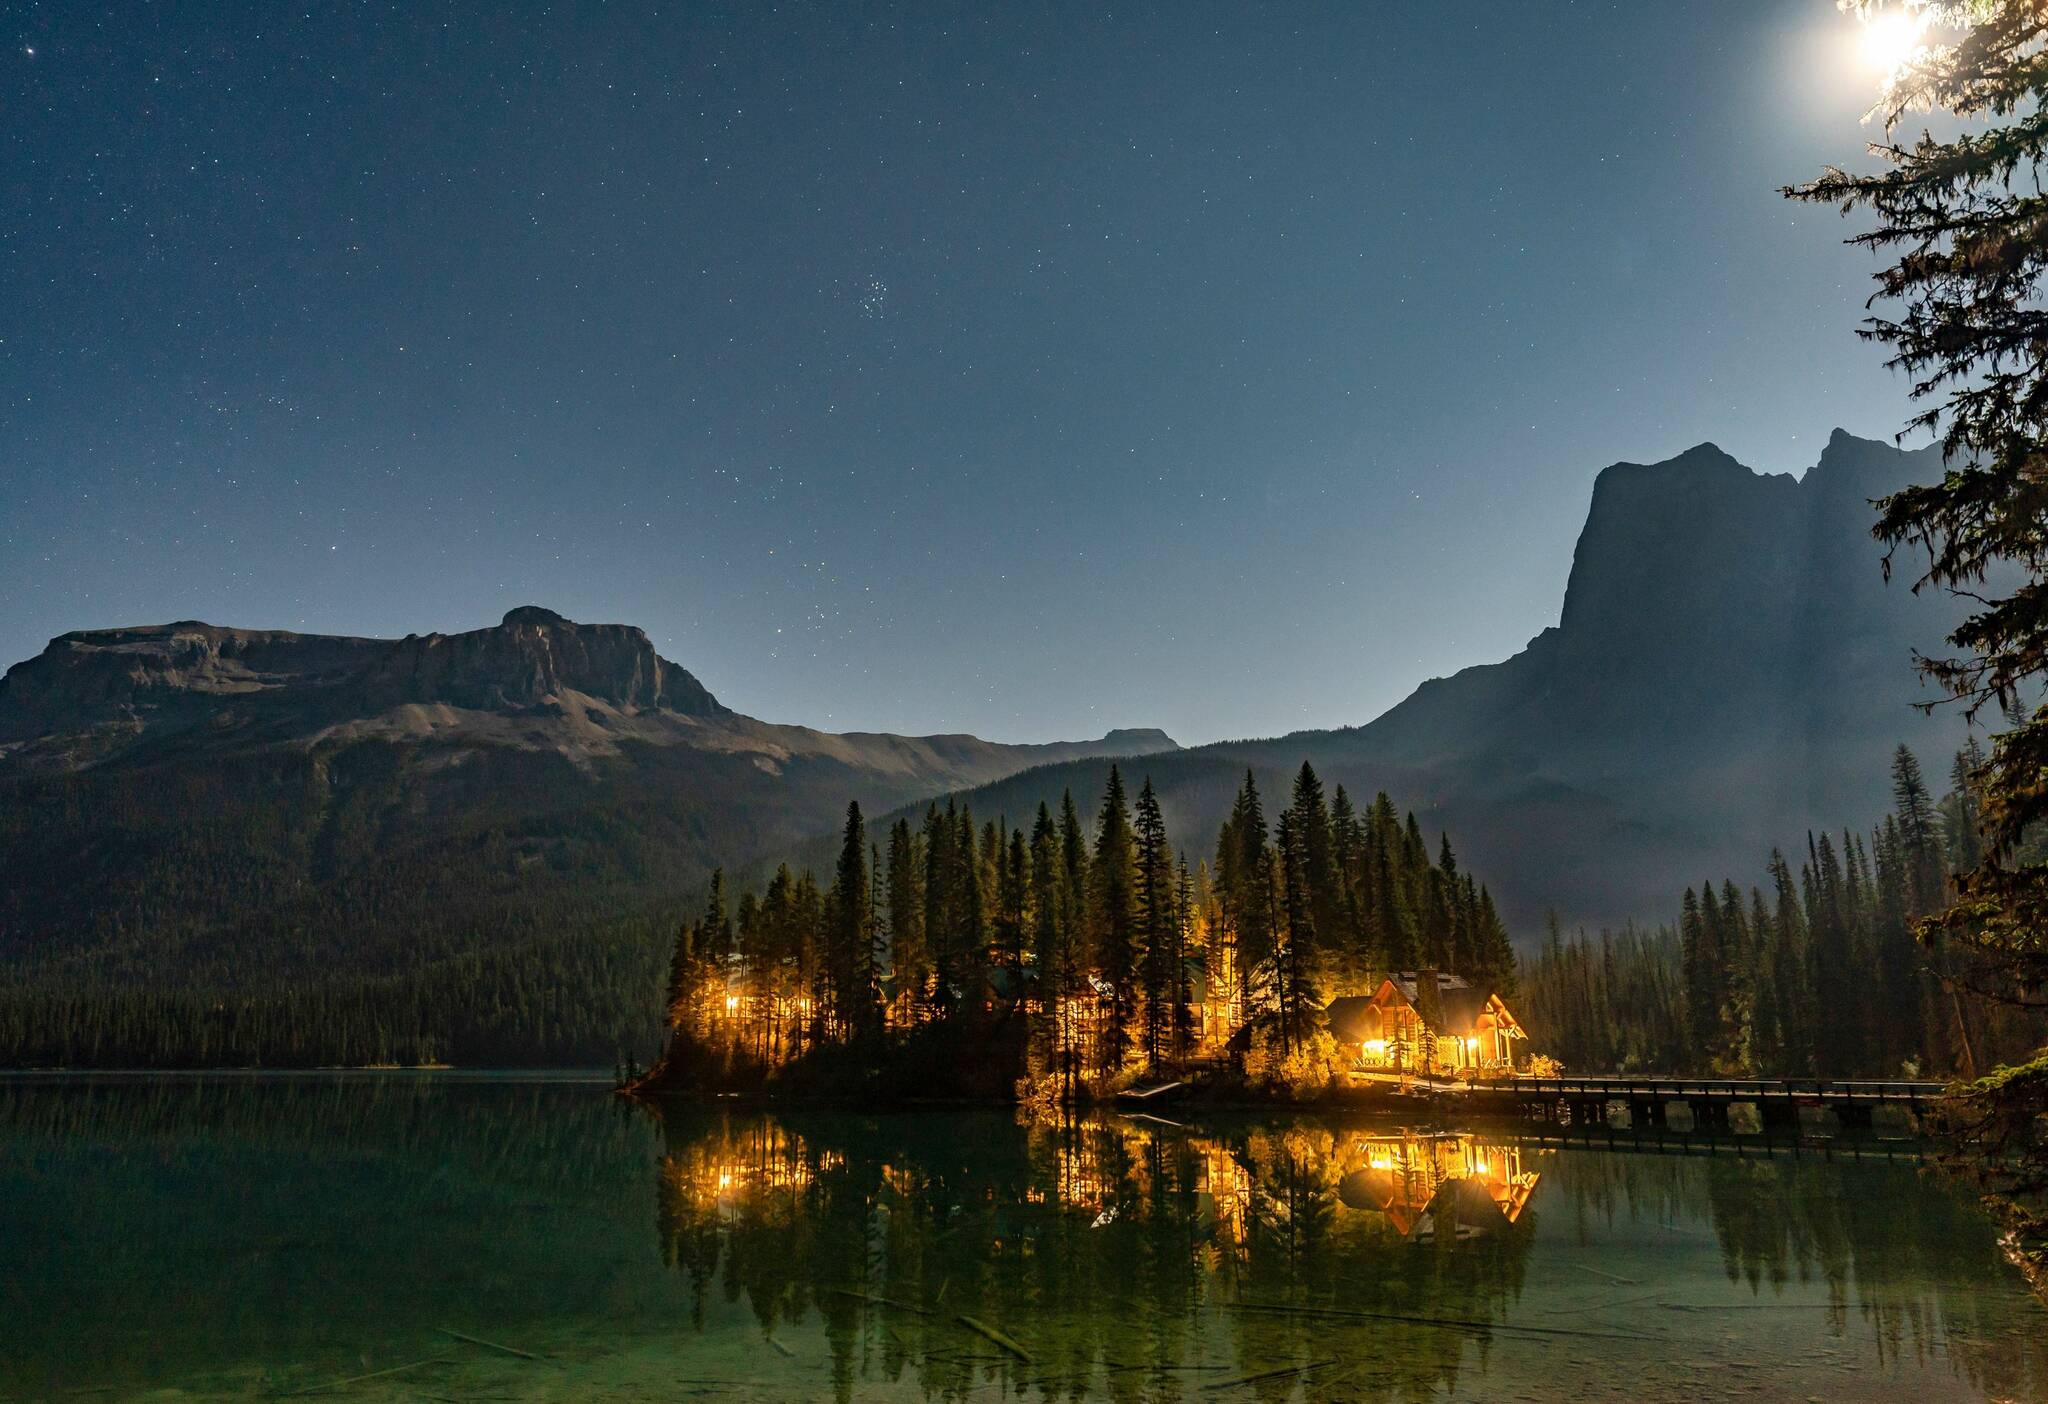 The 2023 Amateur Photographer of the Year grand prize winner: Brian Sondergaard’s Midnight at Emerald, Yoho National Park. The 2024 contest is underway now!